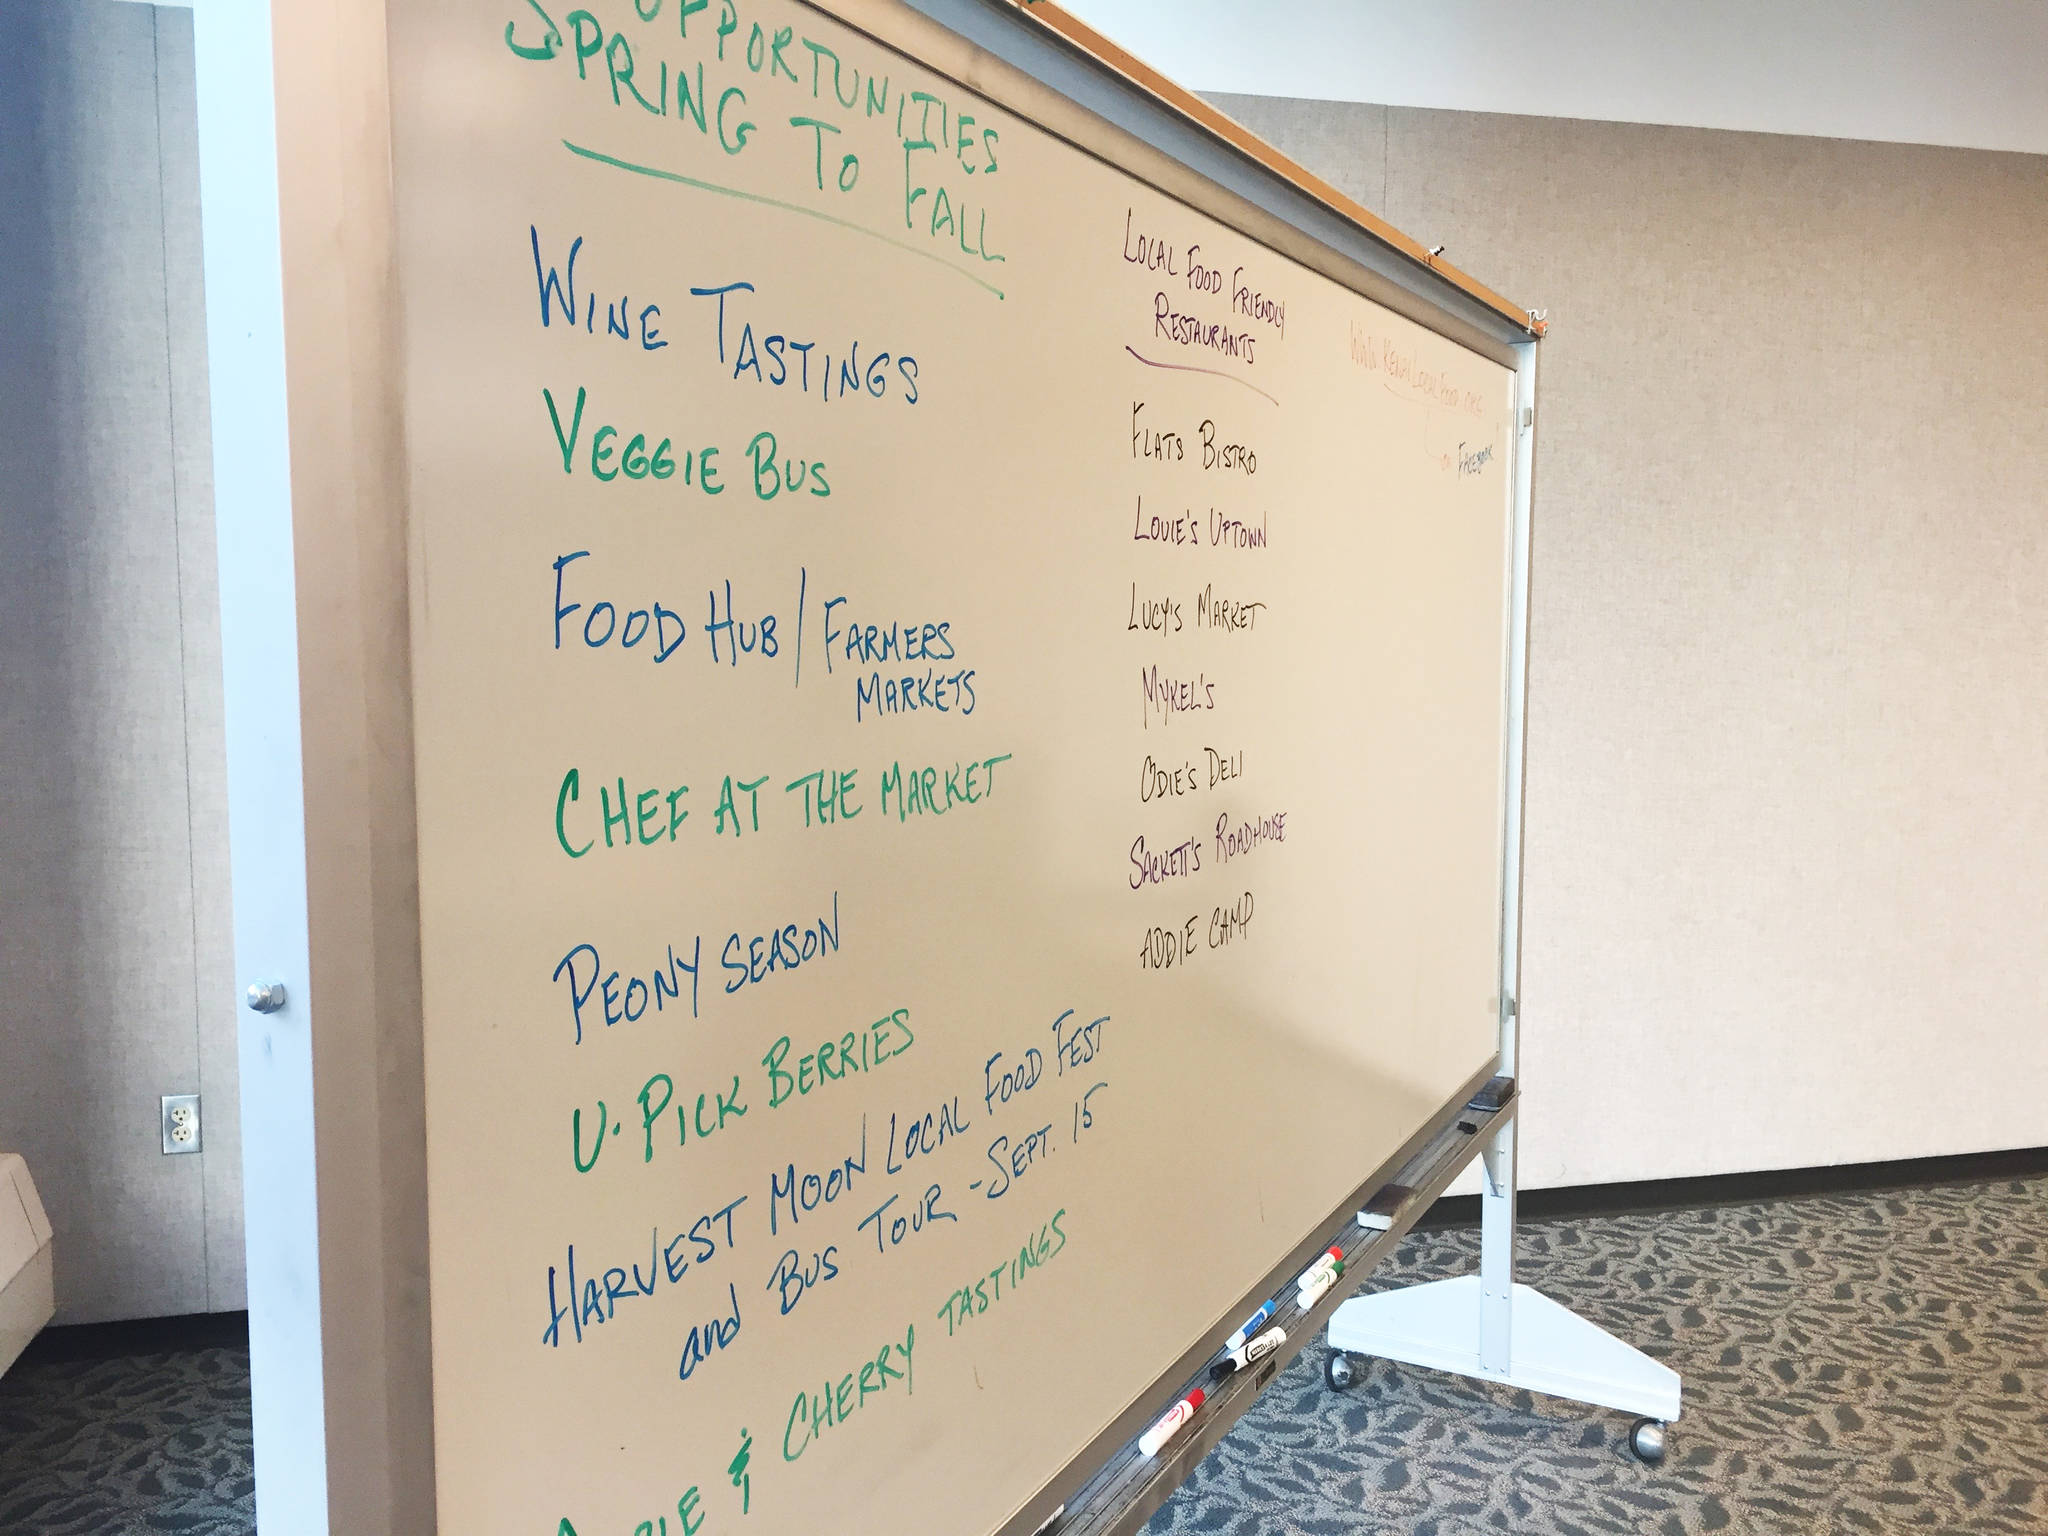 A white board displays ideas for attracting tourists to farms brainstormed by a group of farm operators, local food enthusiasts and restauranteurs at a presentation and workshop on agritourism by Alaska Farm Tours owner Margaret Adsit at the Donald E. Gilman Kenai River Center on Thursday, April 19, 2018 in Soldotna, Alaska. (Photo by Elizabeth Earl/Peninsula Clarion)